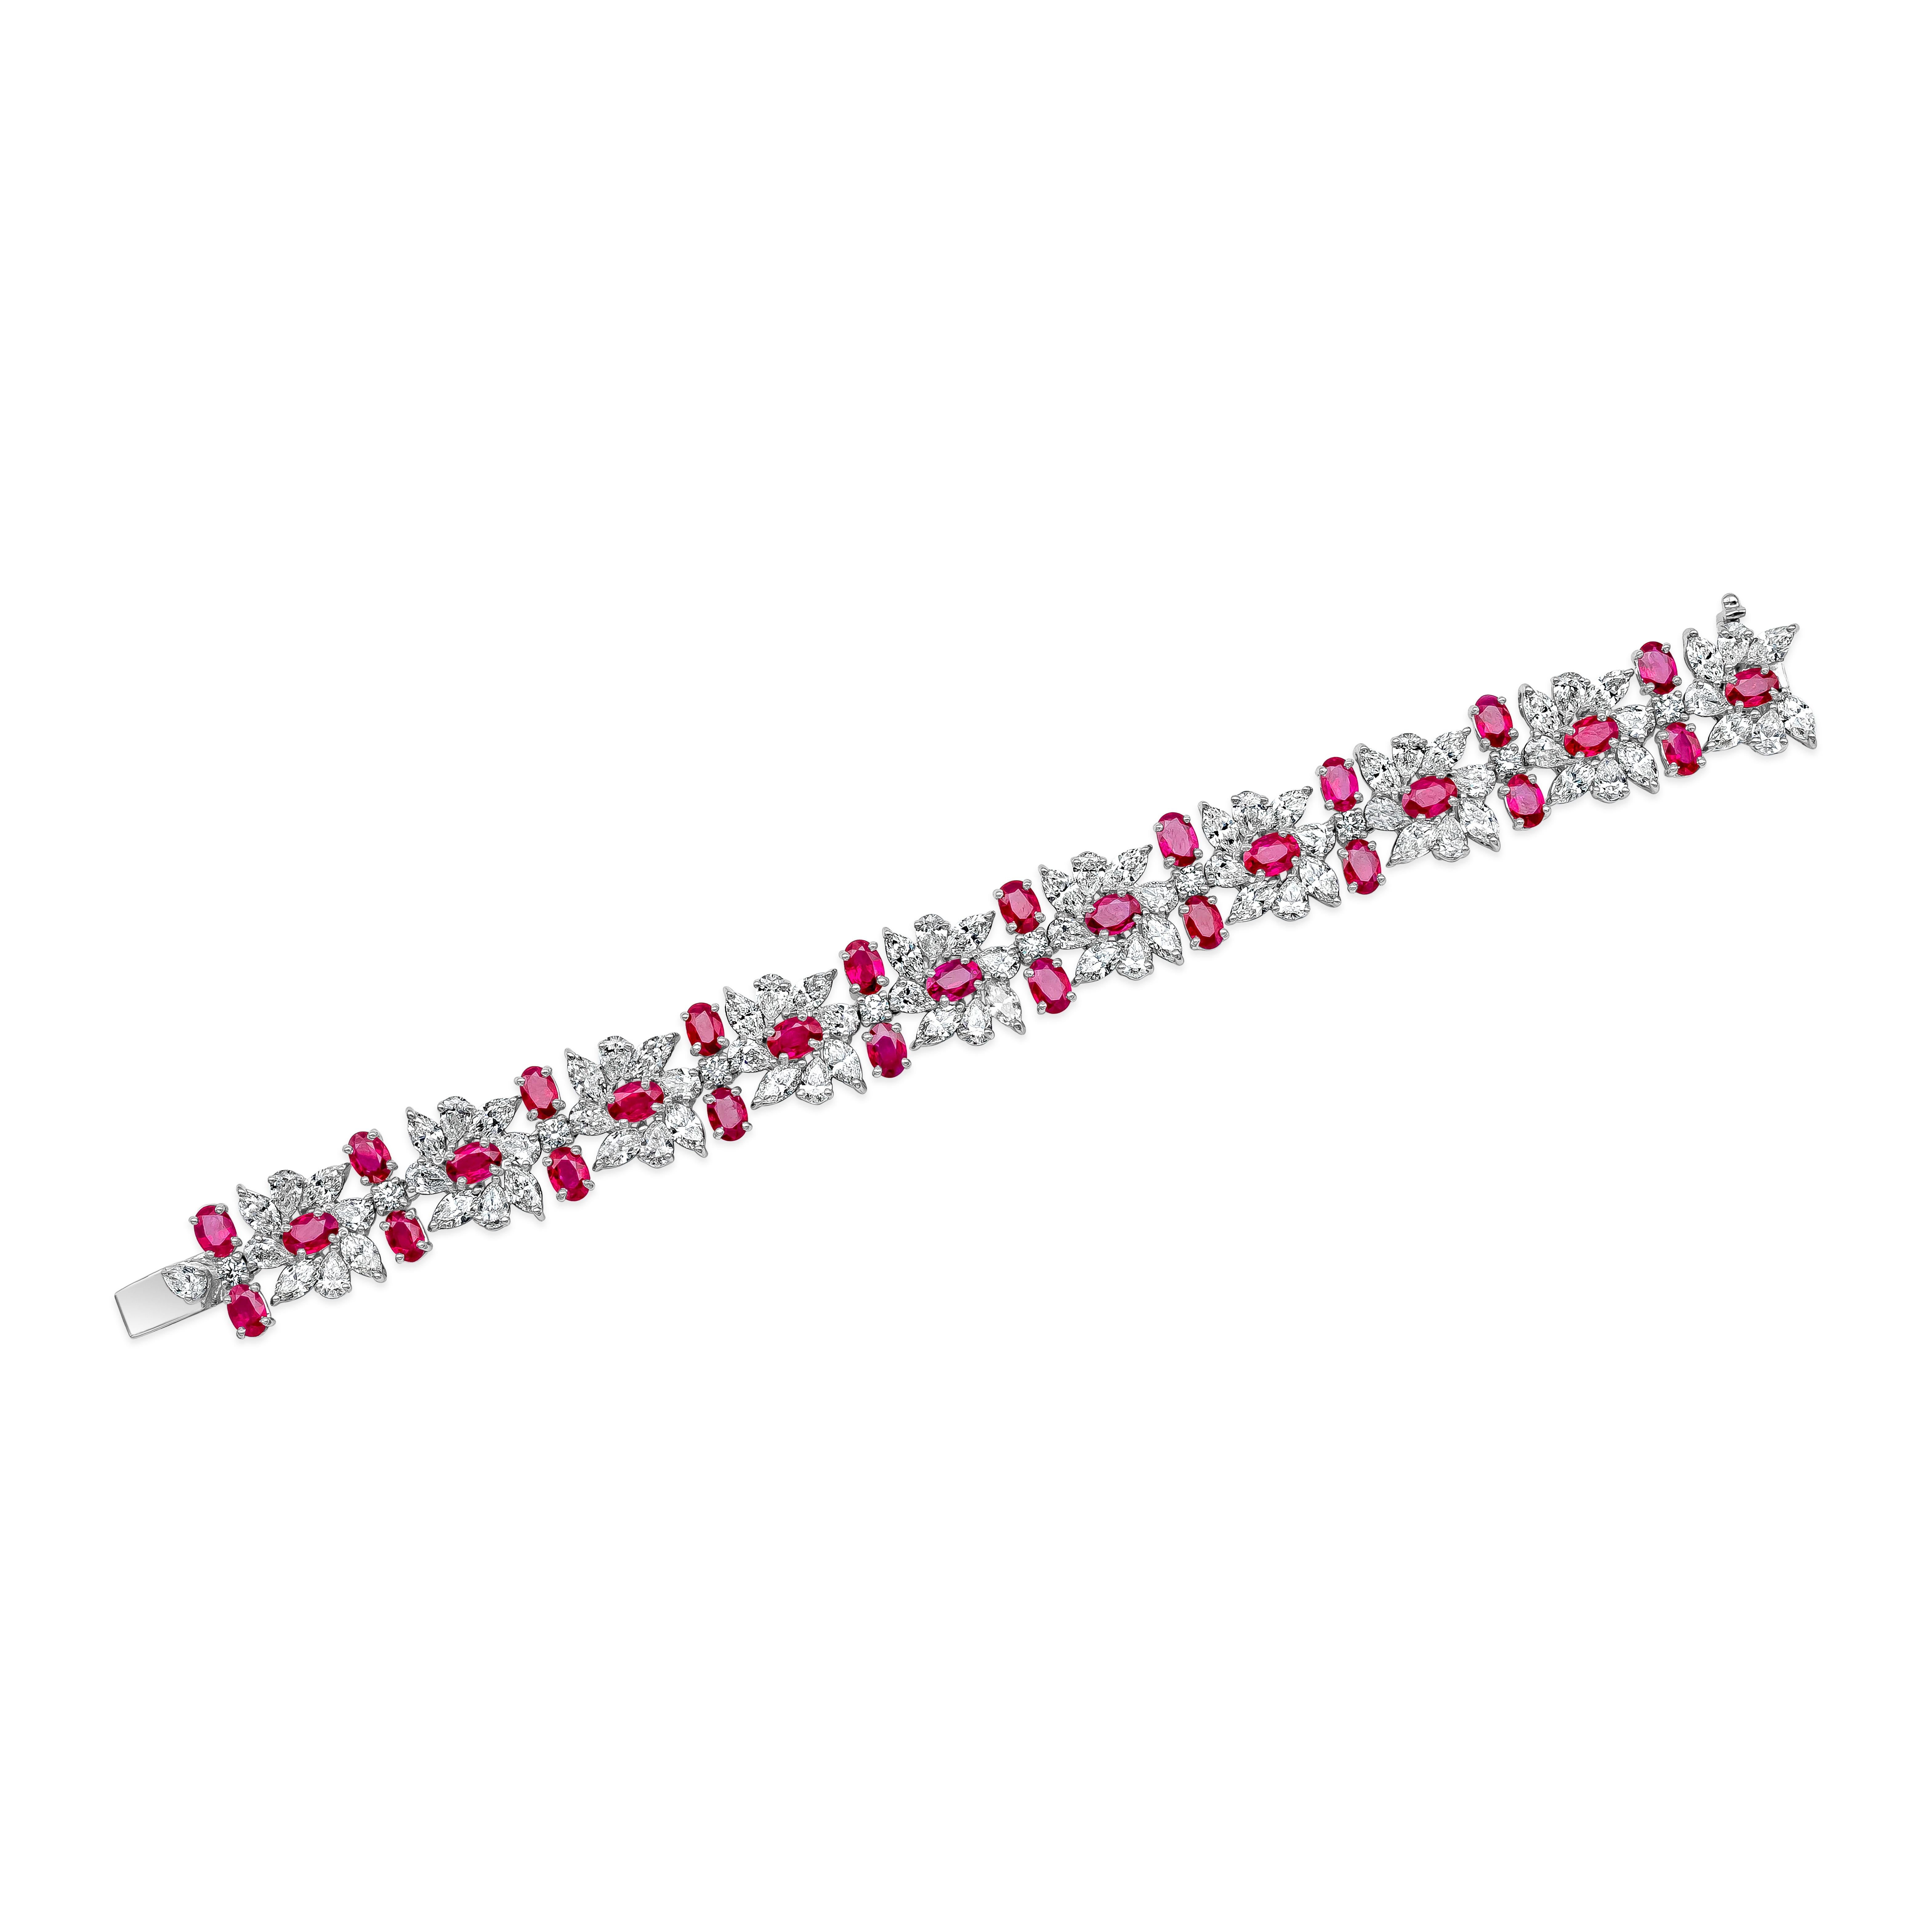 Contemporary Roman Malakov 38.21 Carats Total Mixed-Cut Ruby and Diamond Cluster Bracelet